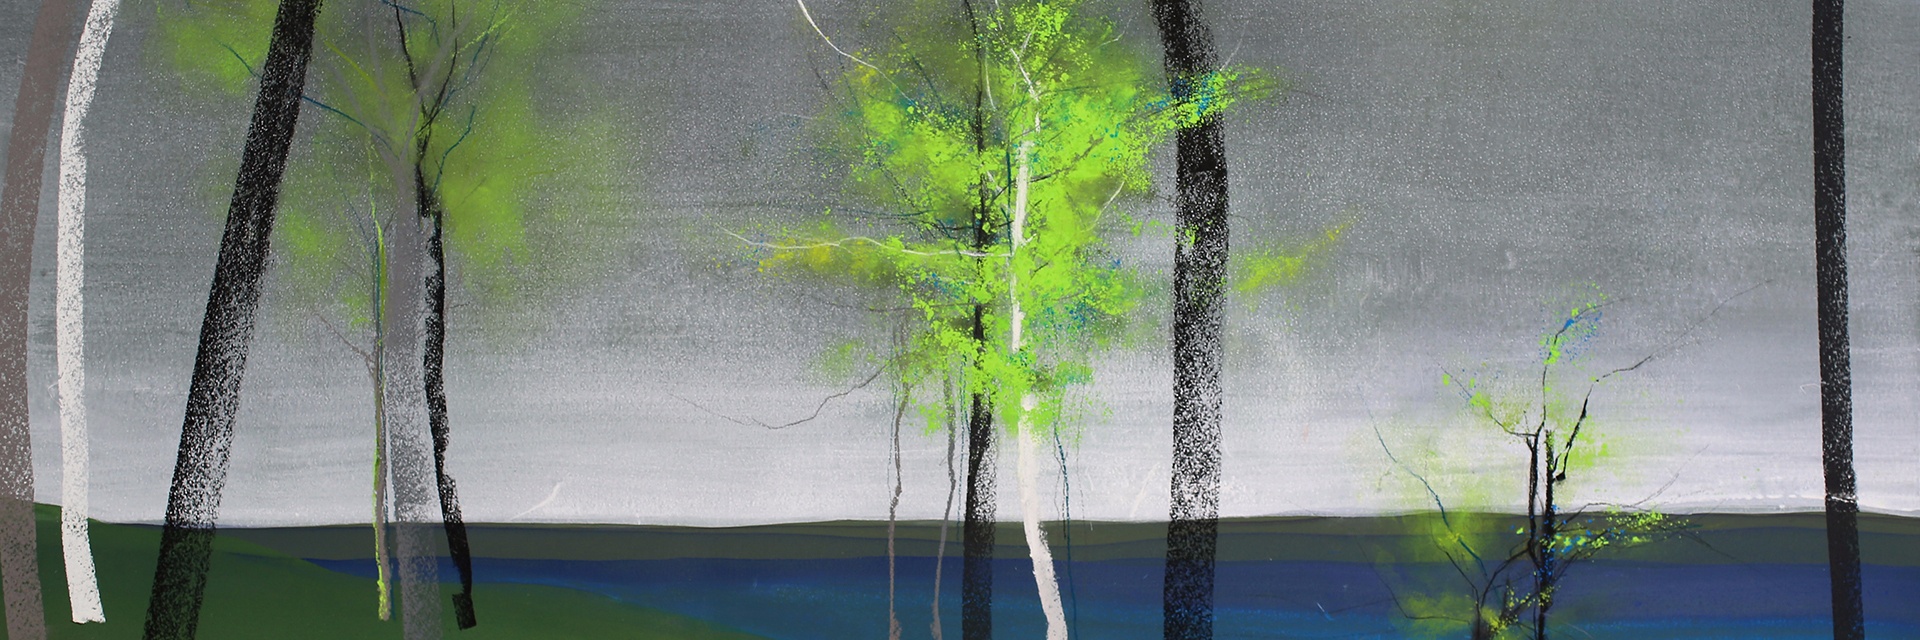 Foggy Morning, 2015, by Lesa Chittenden Lim (Courtesy of the artist)